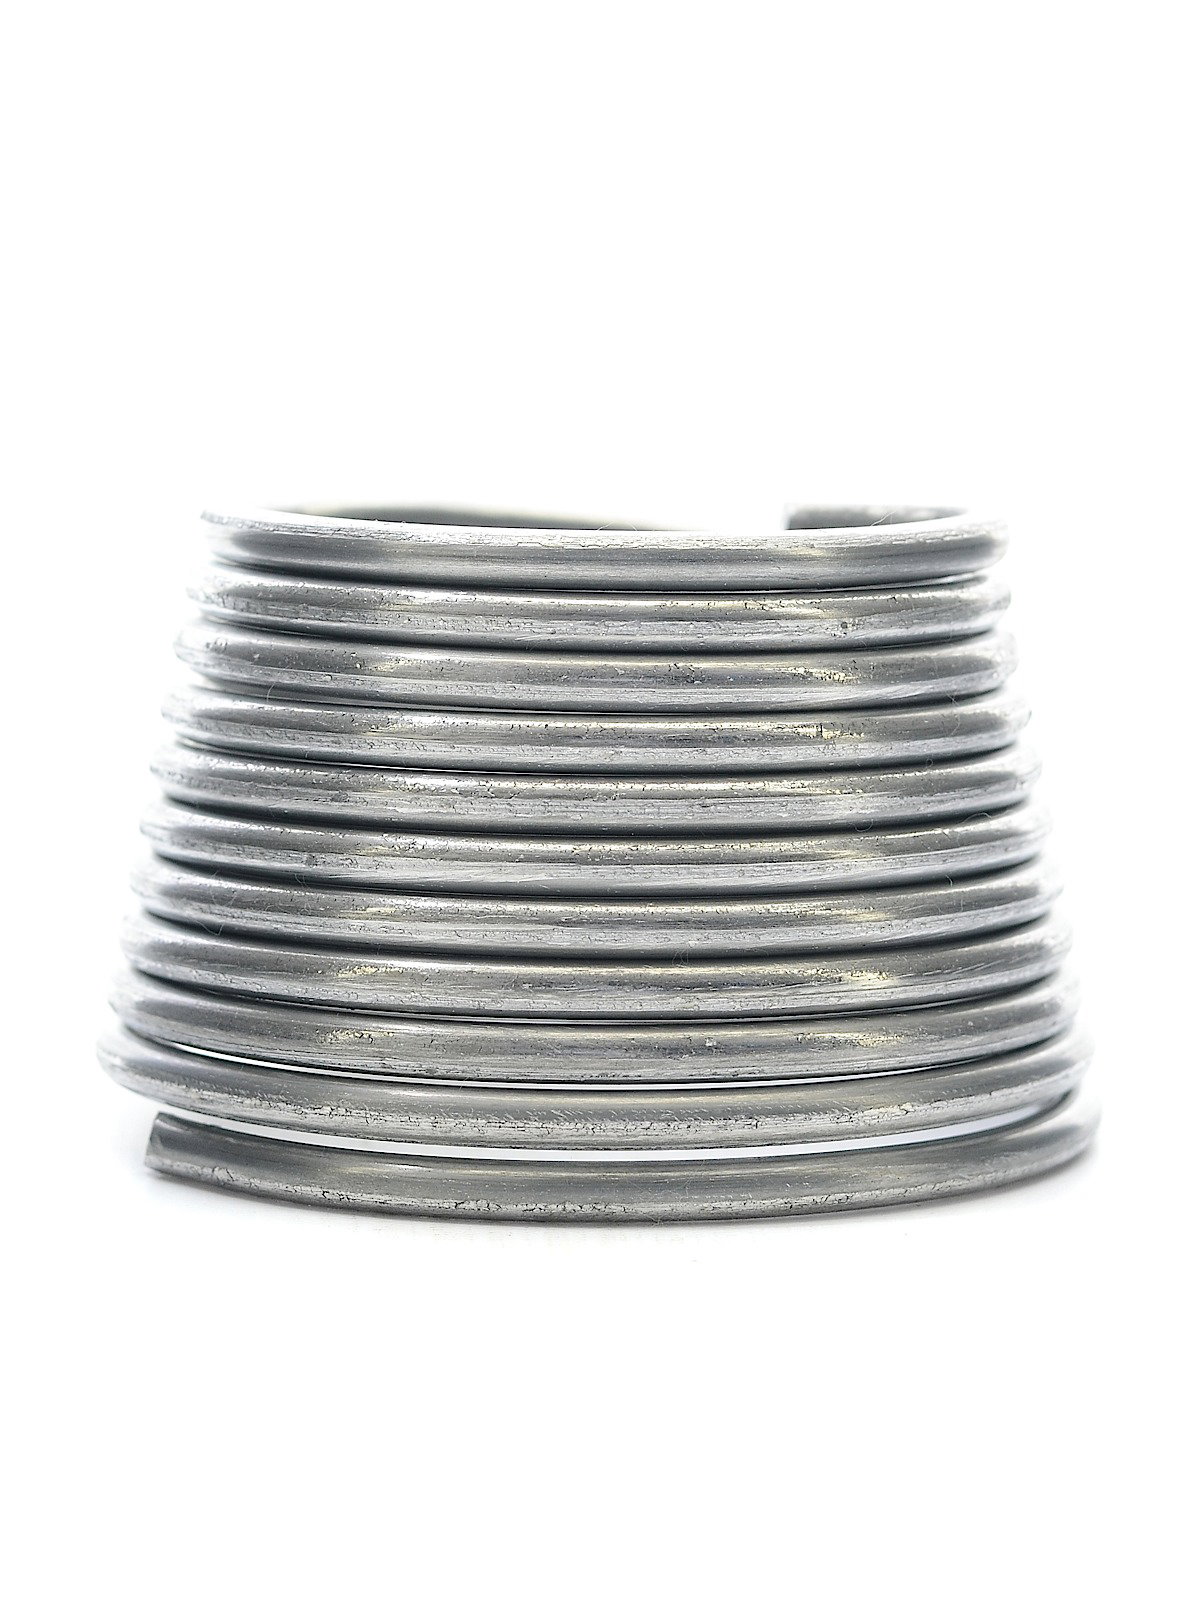  Aluminum Armature Wire for Sculpting, 2 mm Thickness Metal  Bendable Wire Flexible Wrapping Weaving for Crafts, Jewelry Making, Doll  Armature, Modeling DIY (12 Gauge, 118 Ft, Silver)